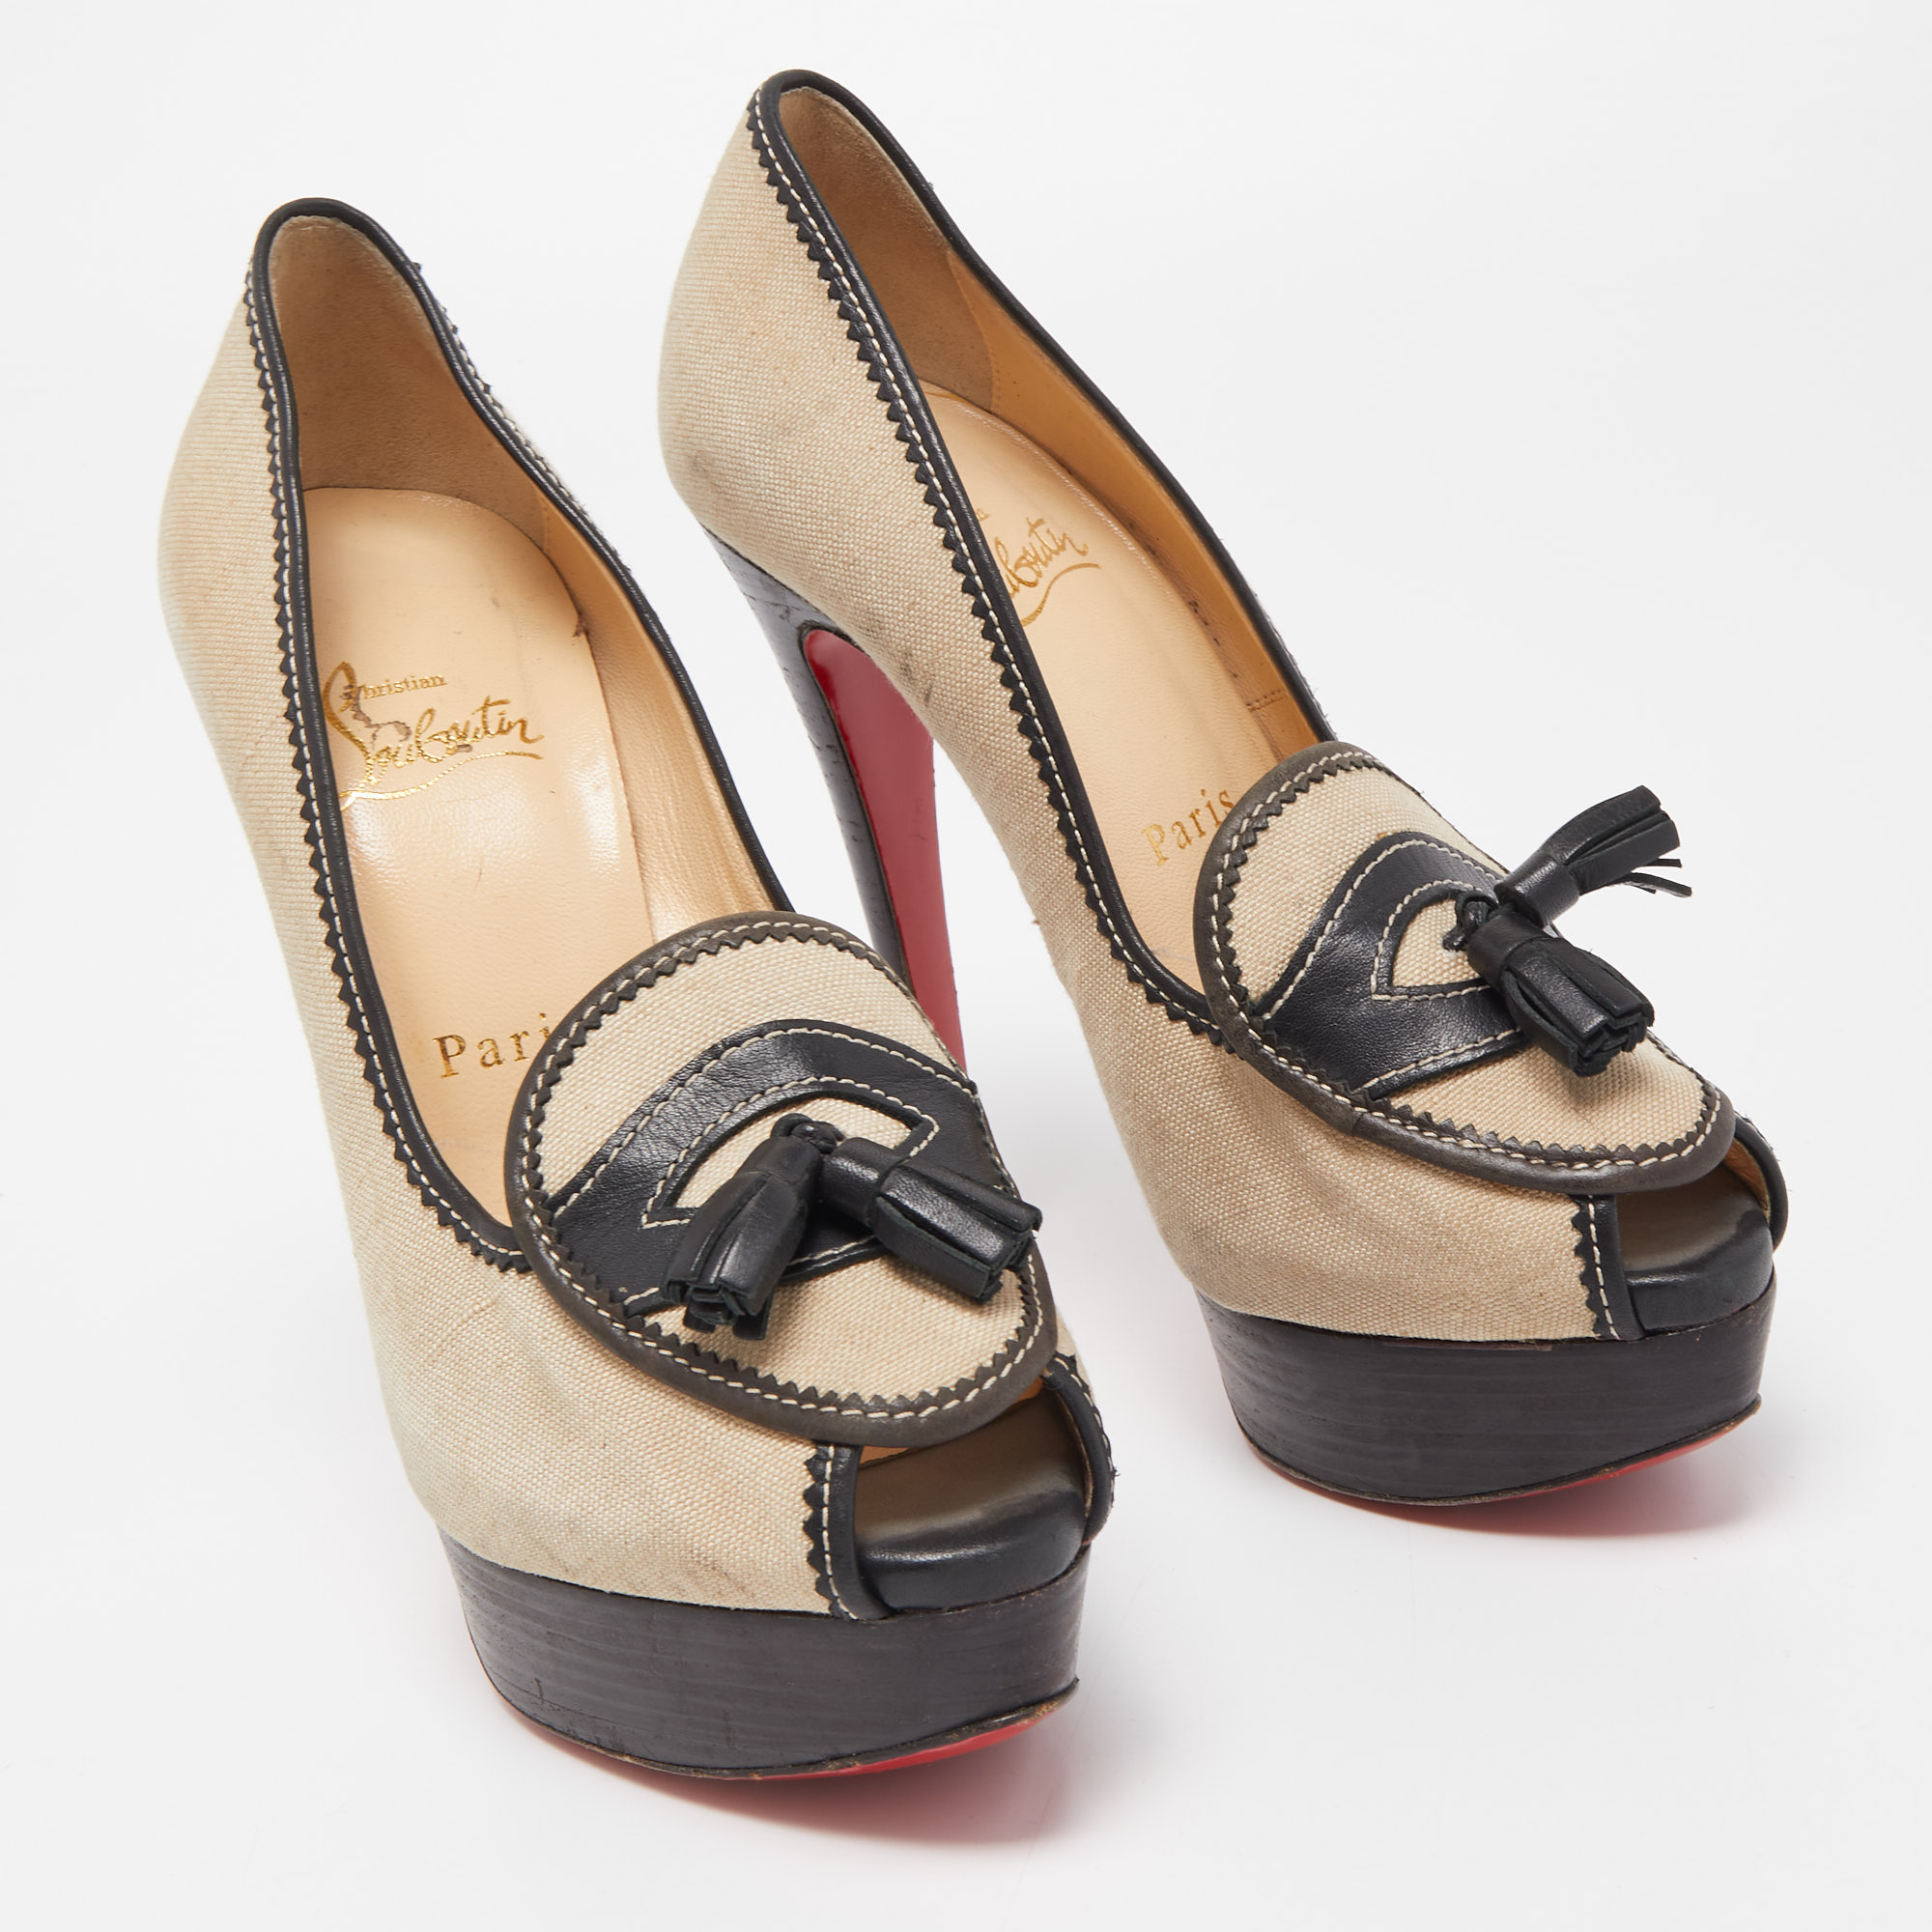 Christian Louboutin Beige/Black Canvas And Leather Alta Campus Pumps Size 36.5